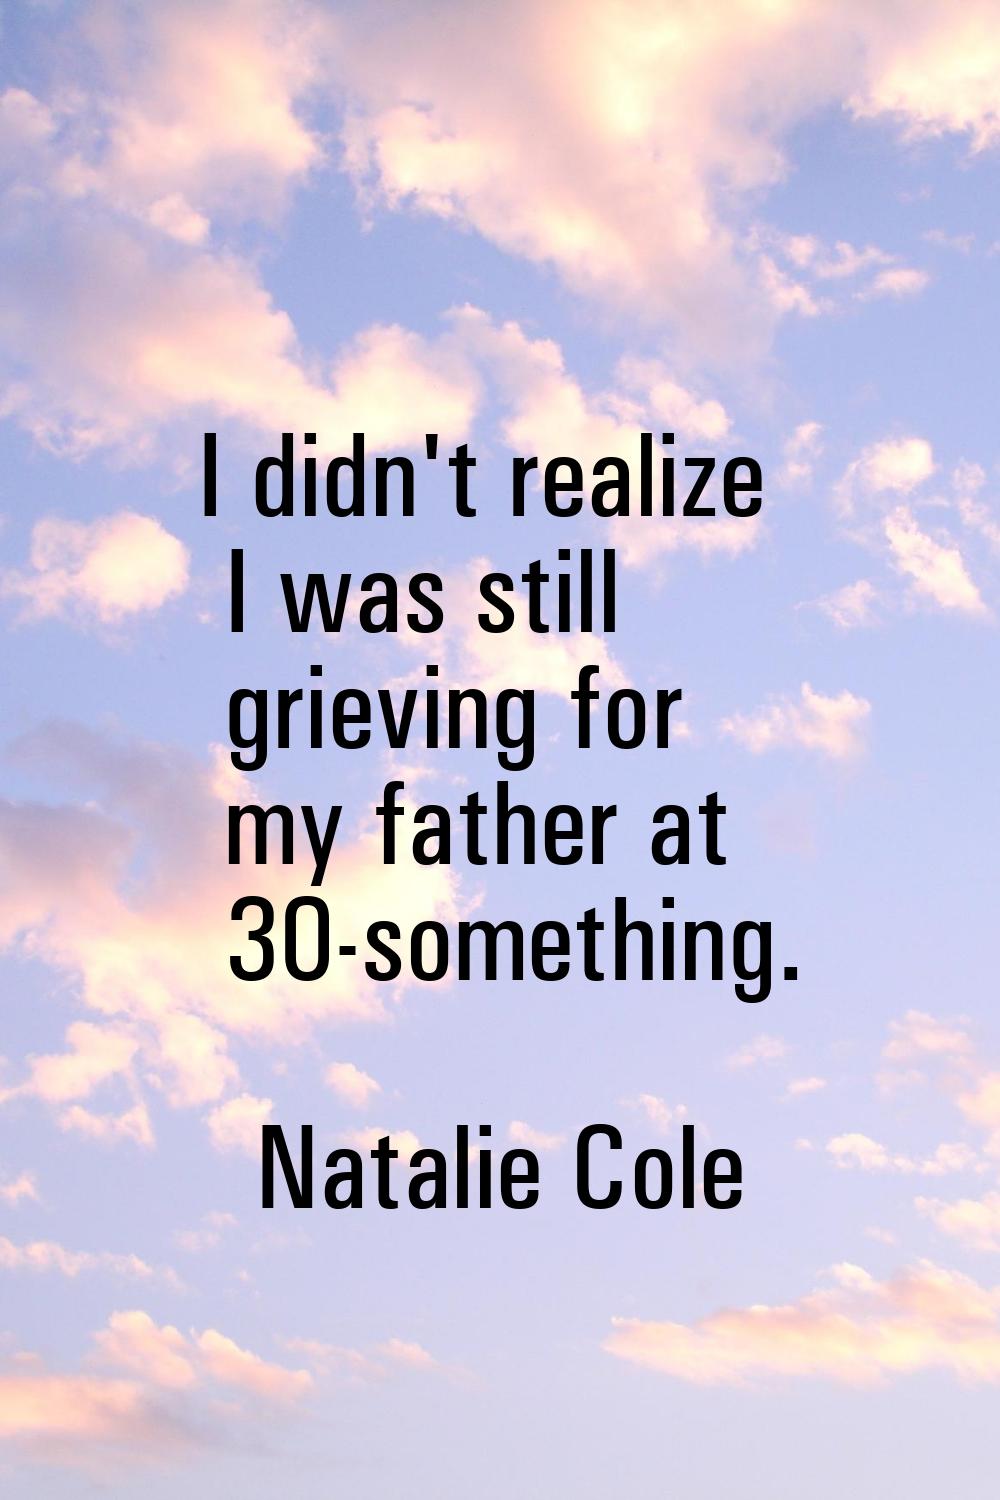 I didn't realize I was still grieving for my father at 30-something.